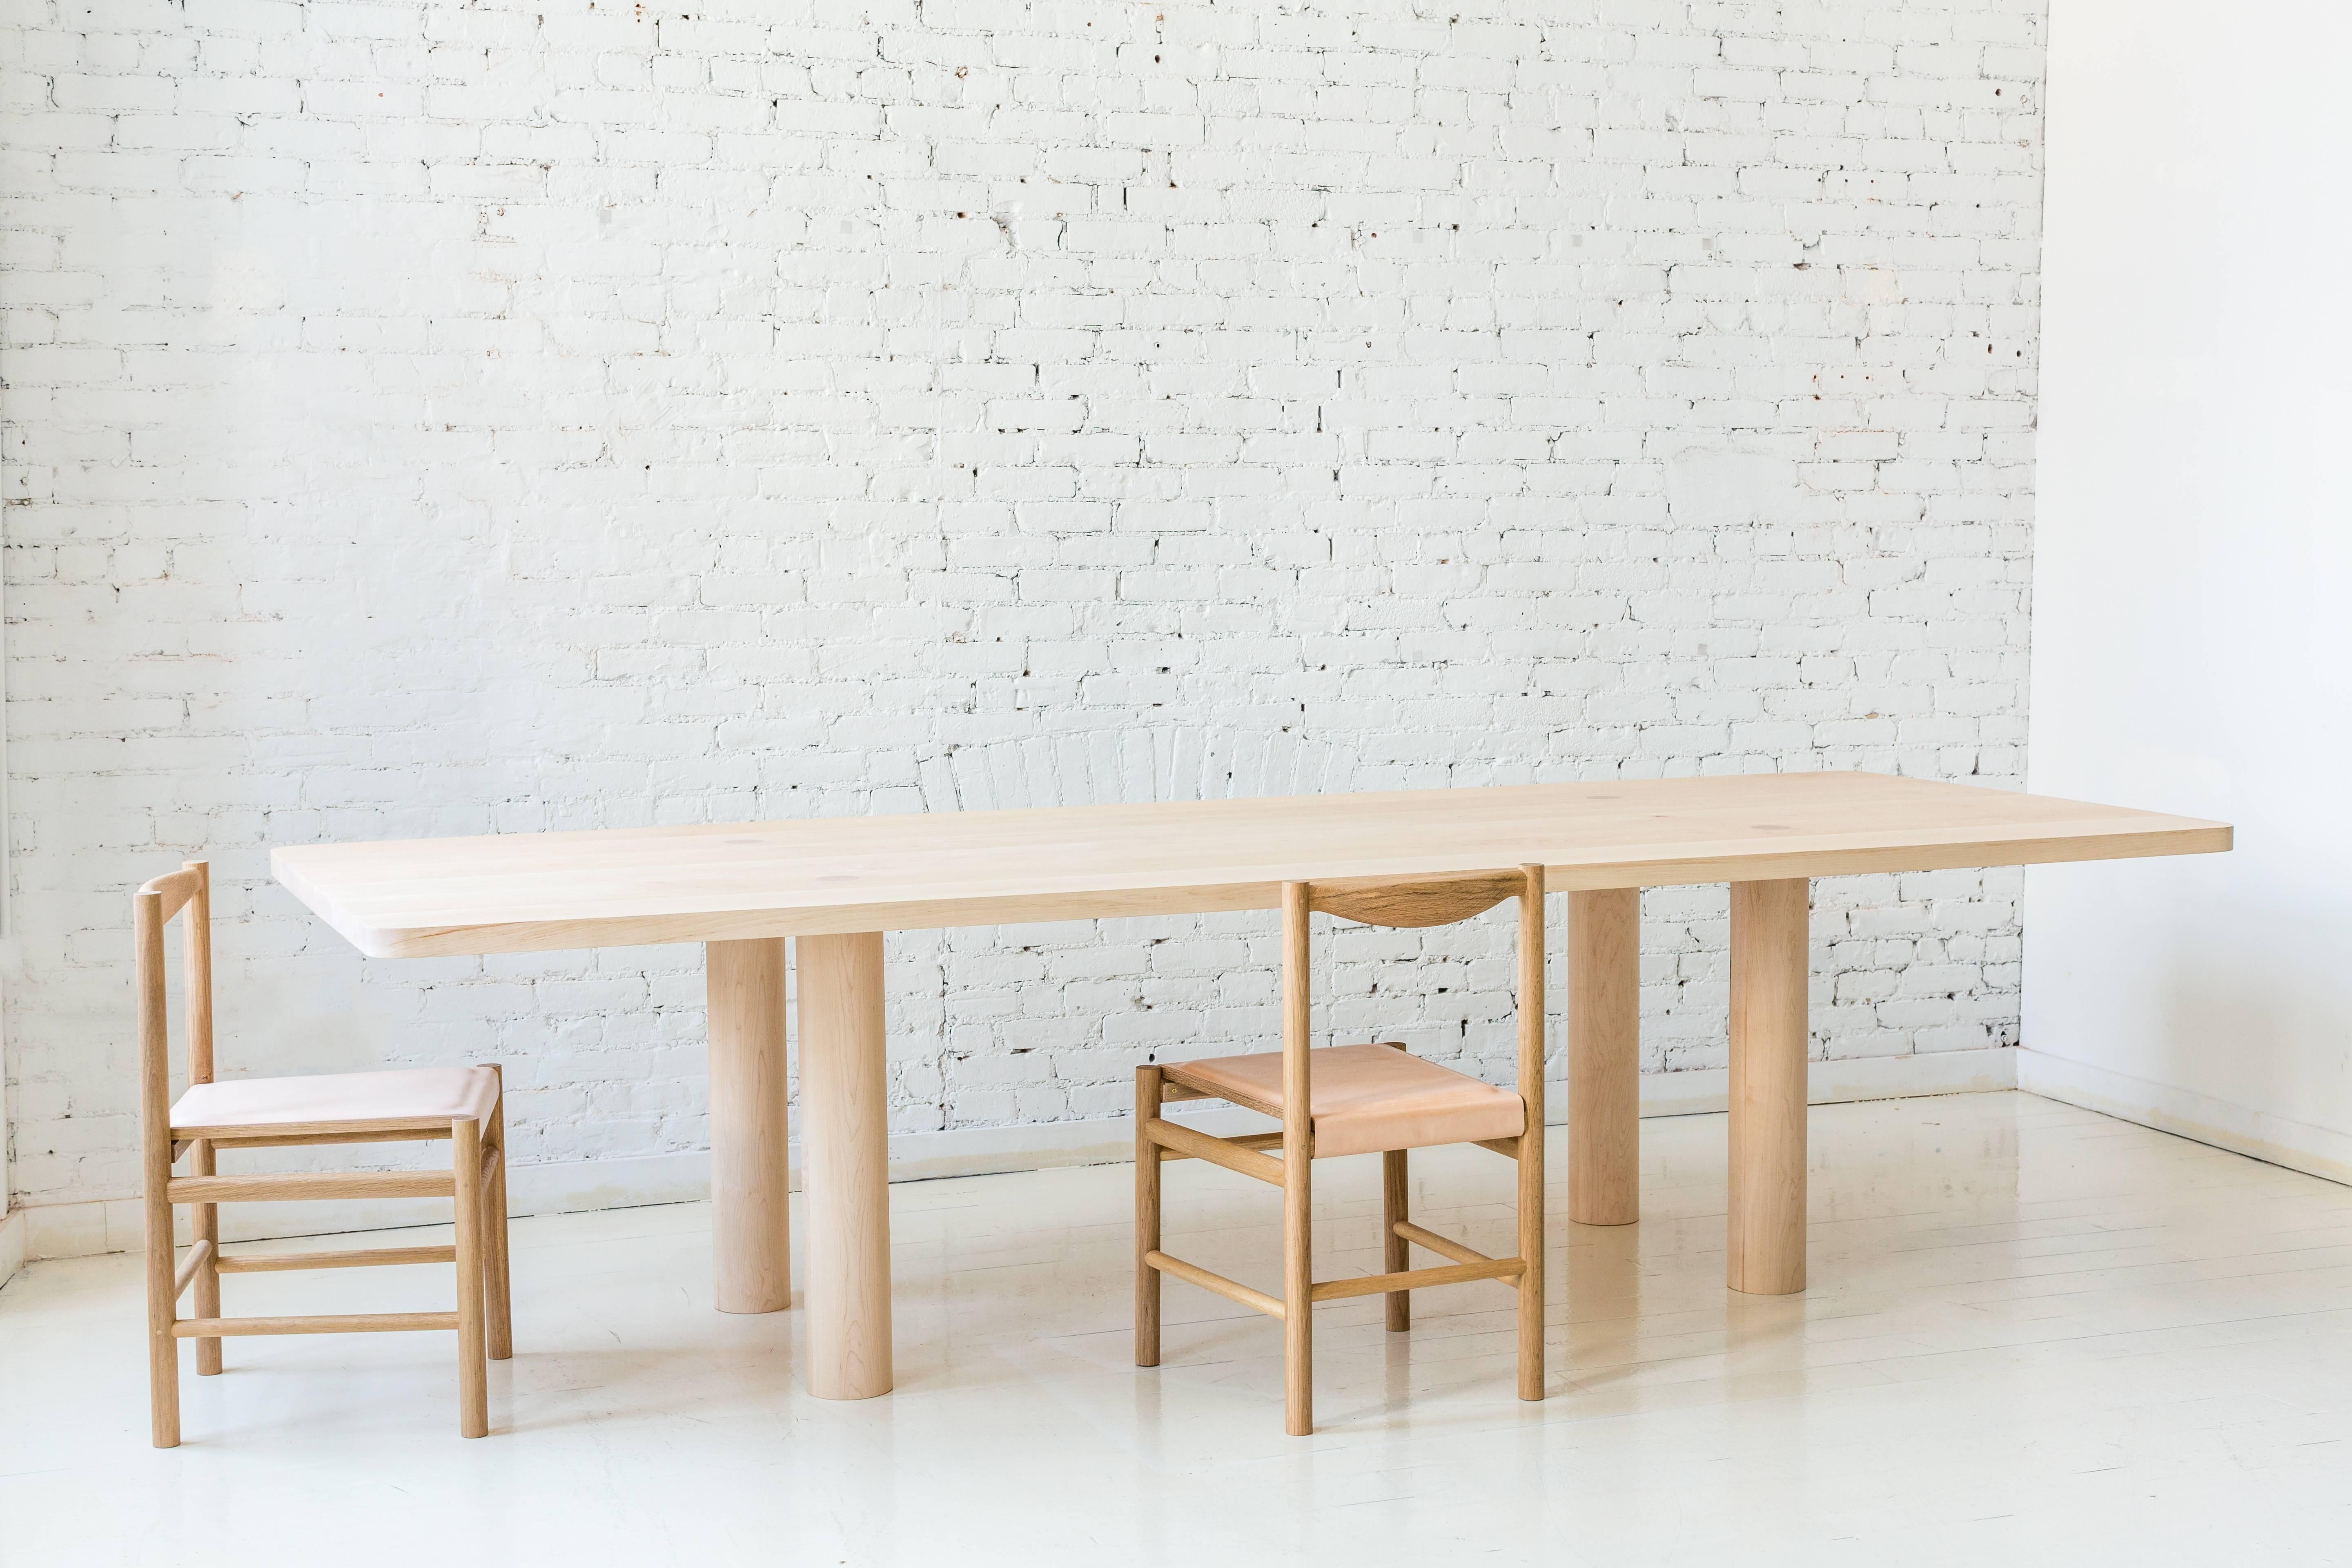 This contemporary, minimal dining table features a two inch thick hardwood top and four large round legs with no other structural base components. Each leg has a tenon that pierces the top, revealing the joinery. This subtle, important detail